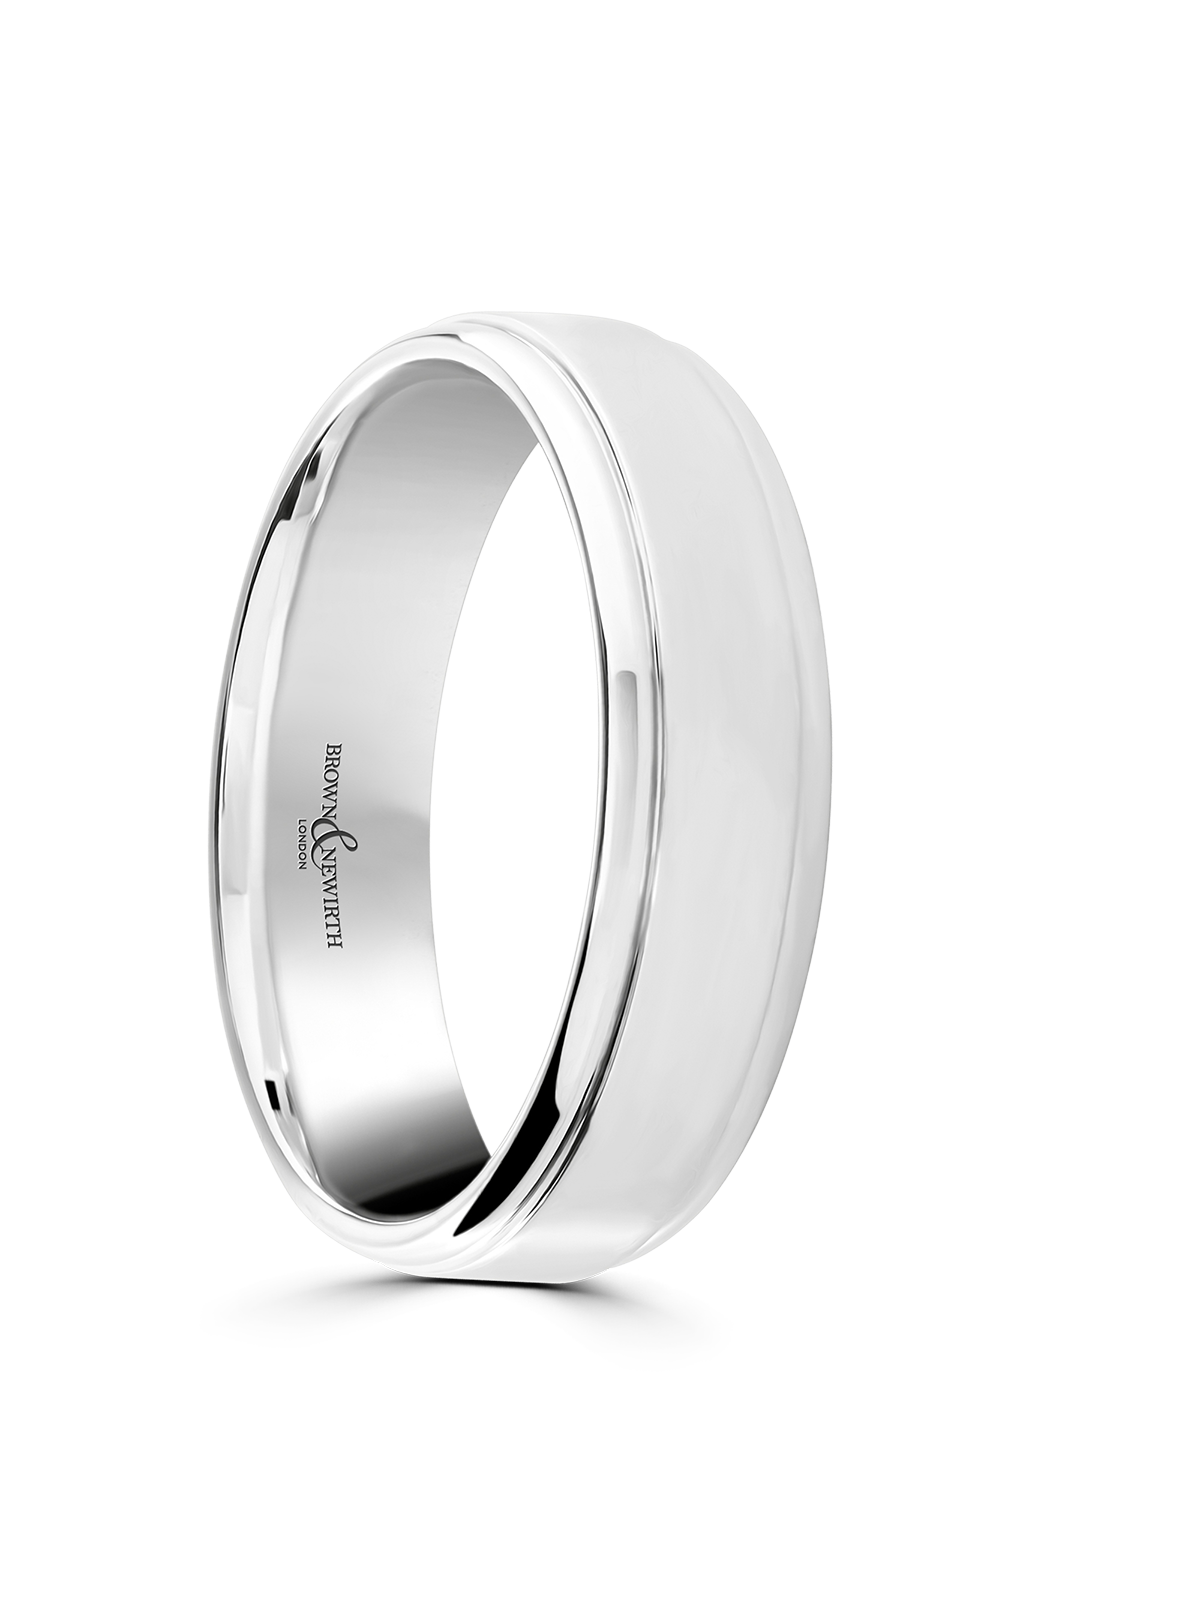 Brown & Newirth Gravity 4mm Patterned Wedding Ring in 18ct White Gold